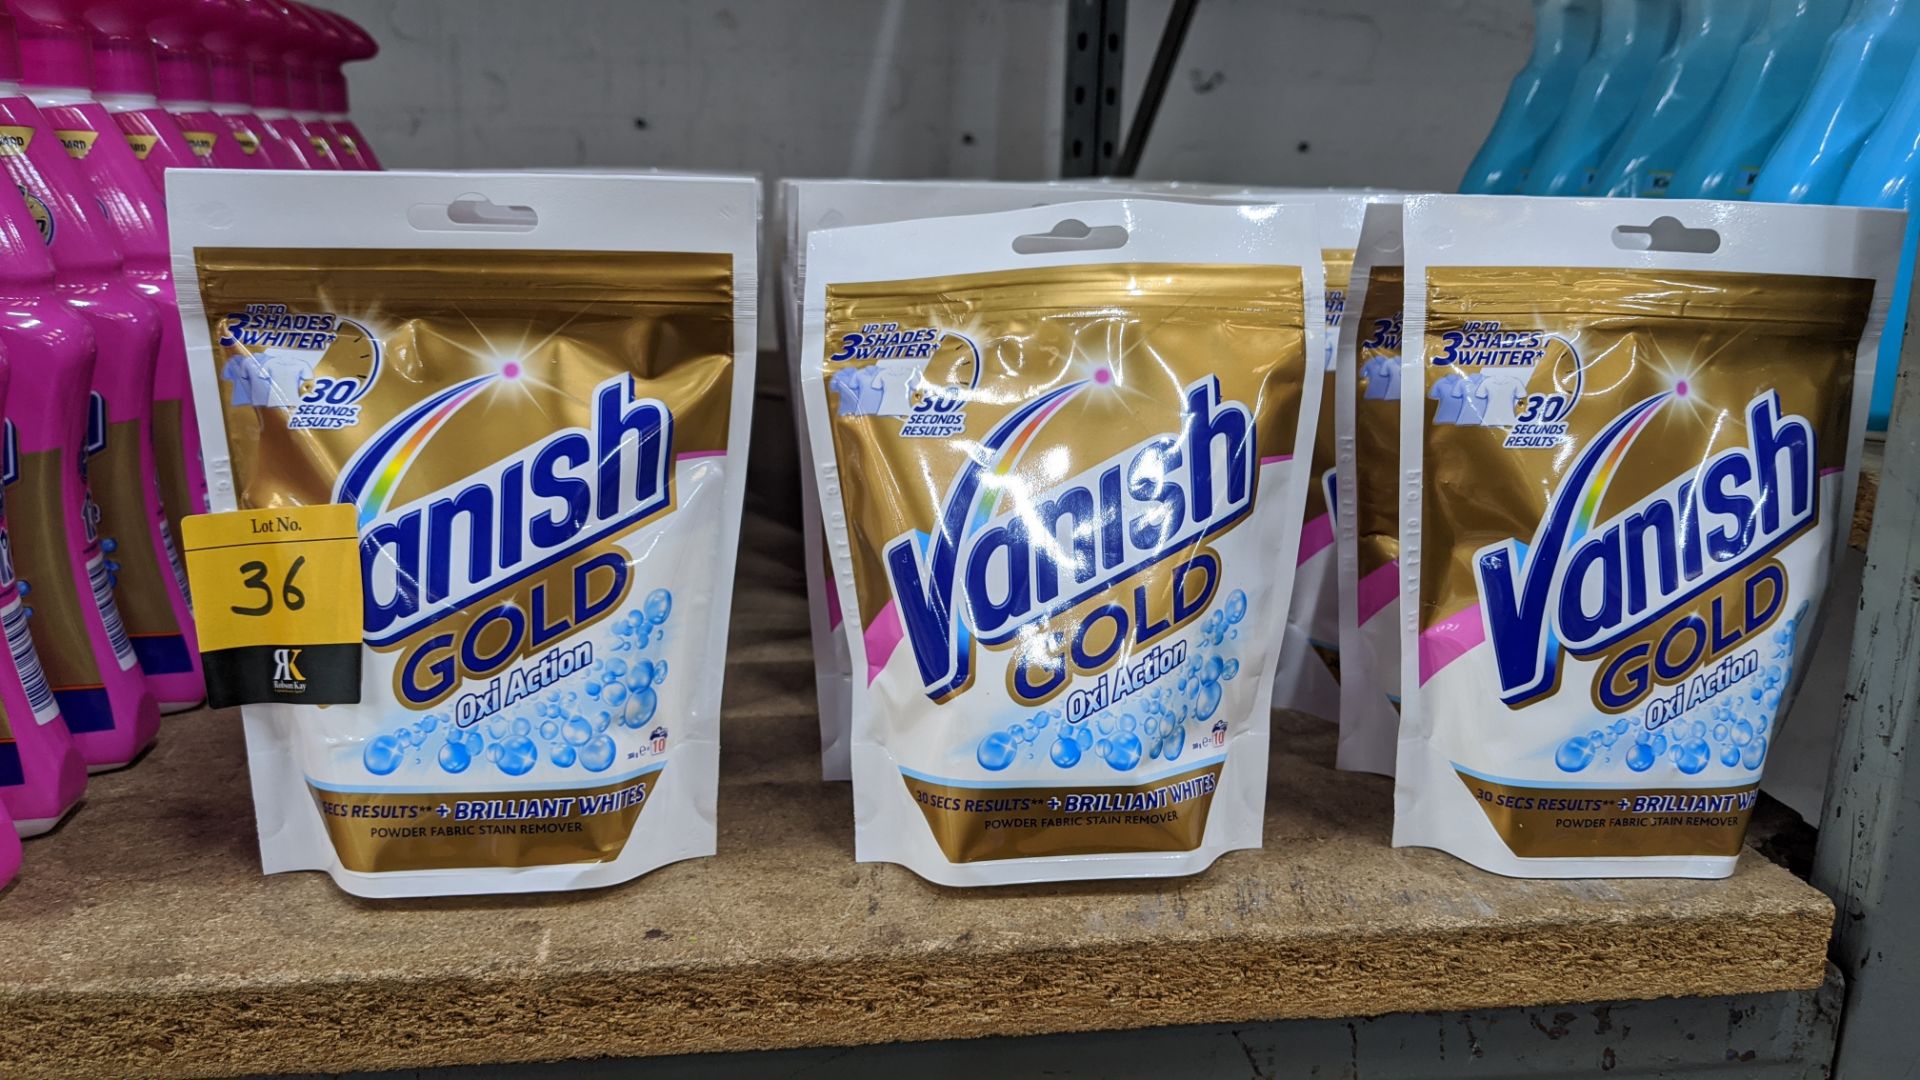 32 off 300g pouches of Vanish Gold OxiAction powder fabric stain remover. IMPORTANT – DO NOT BID